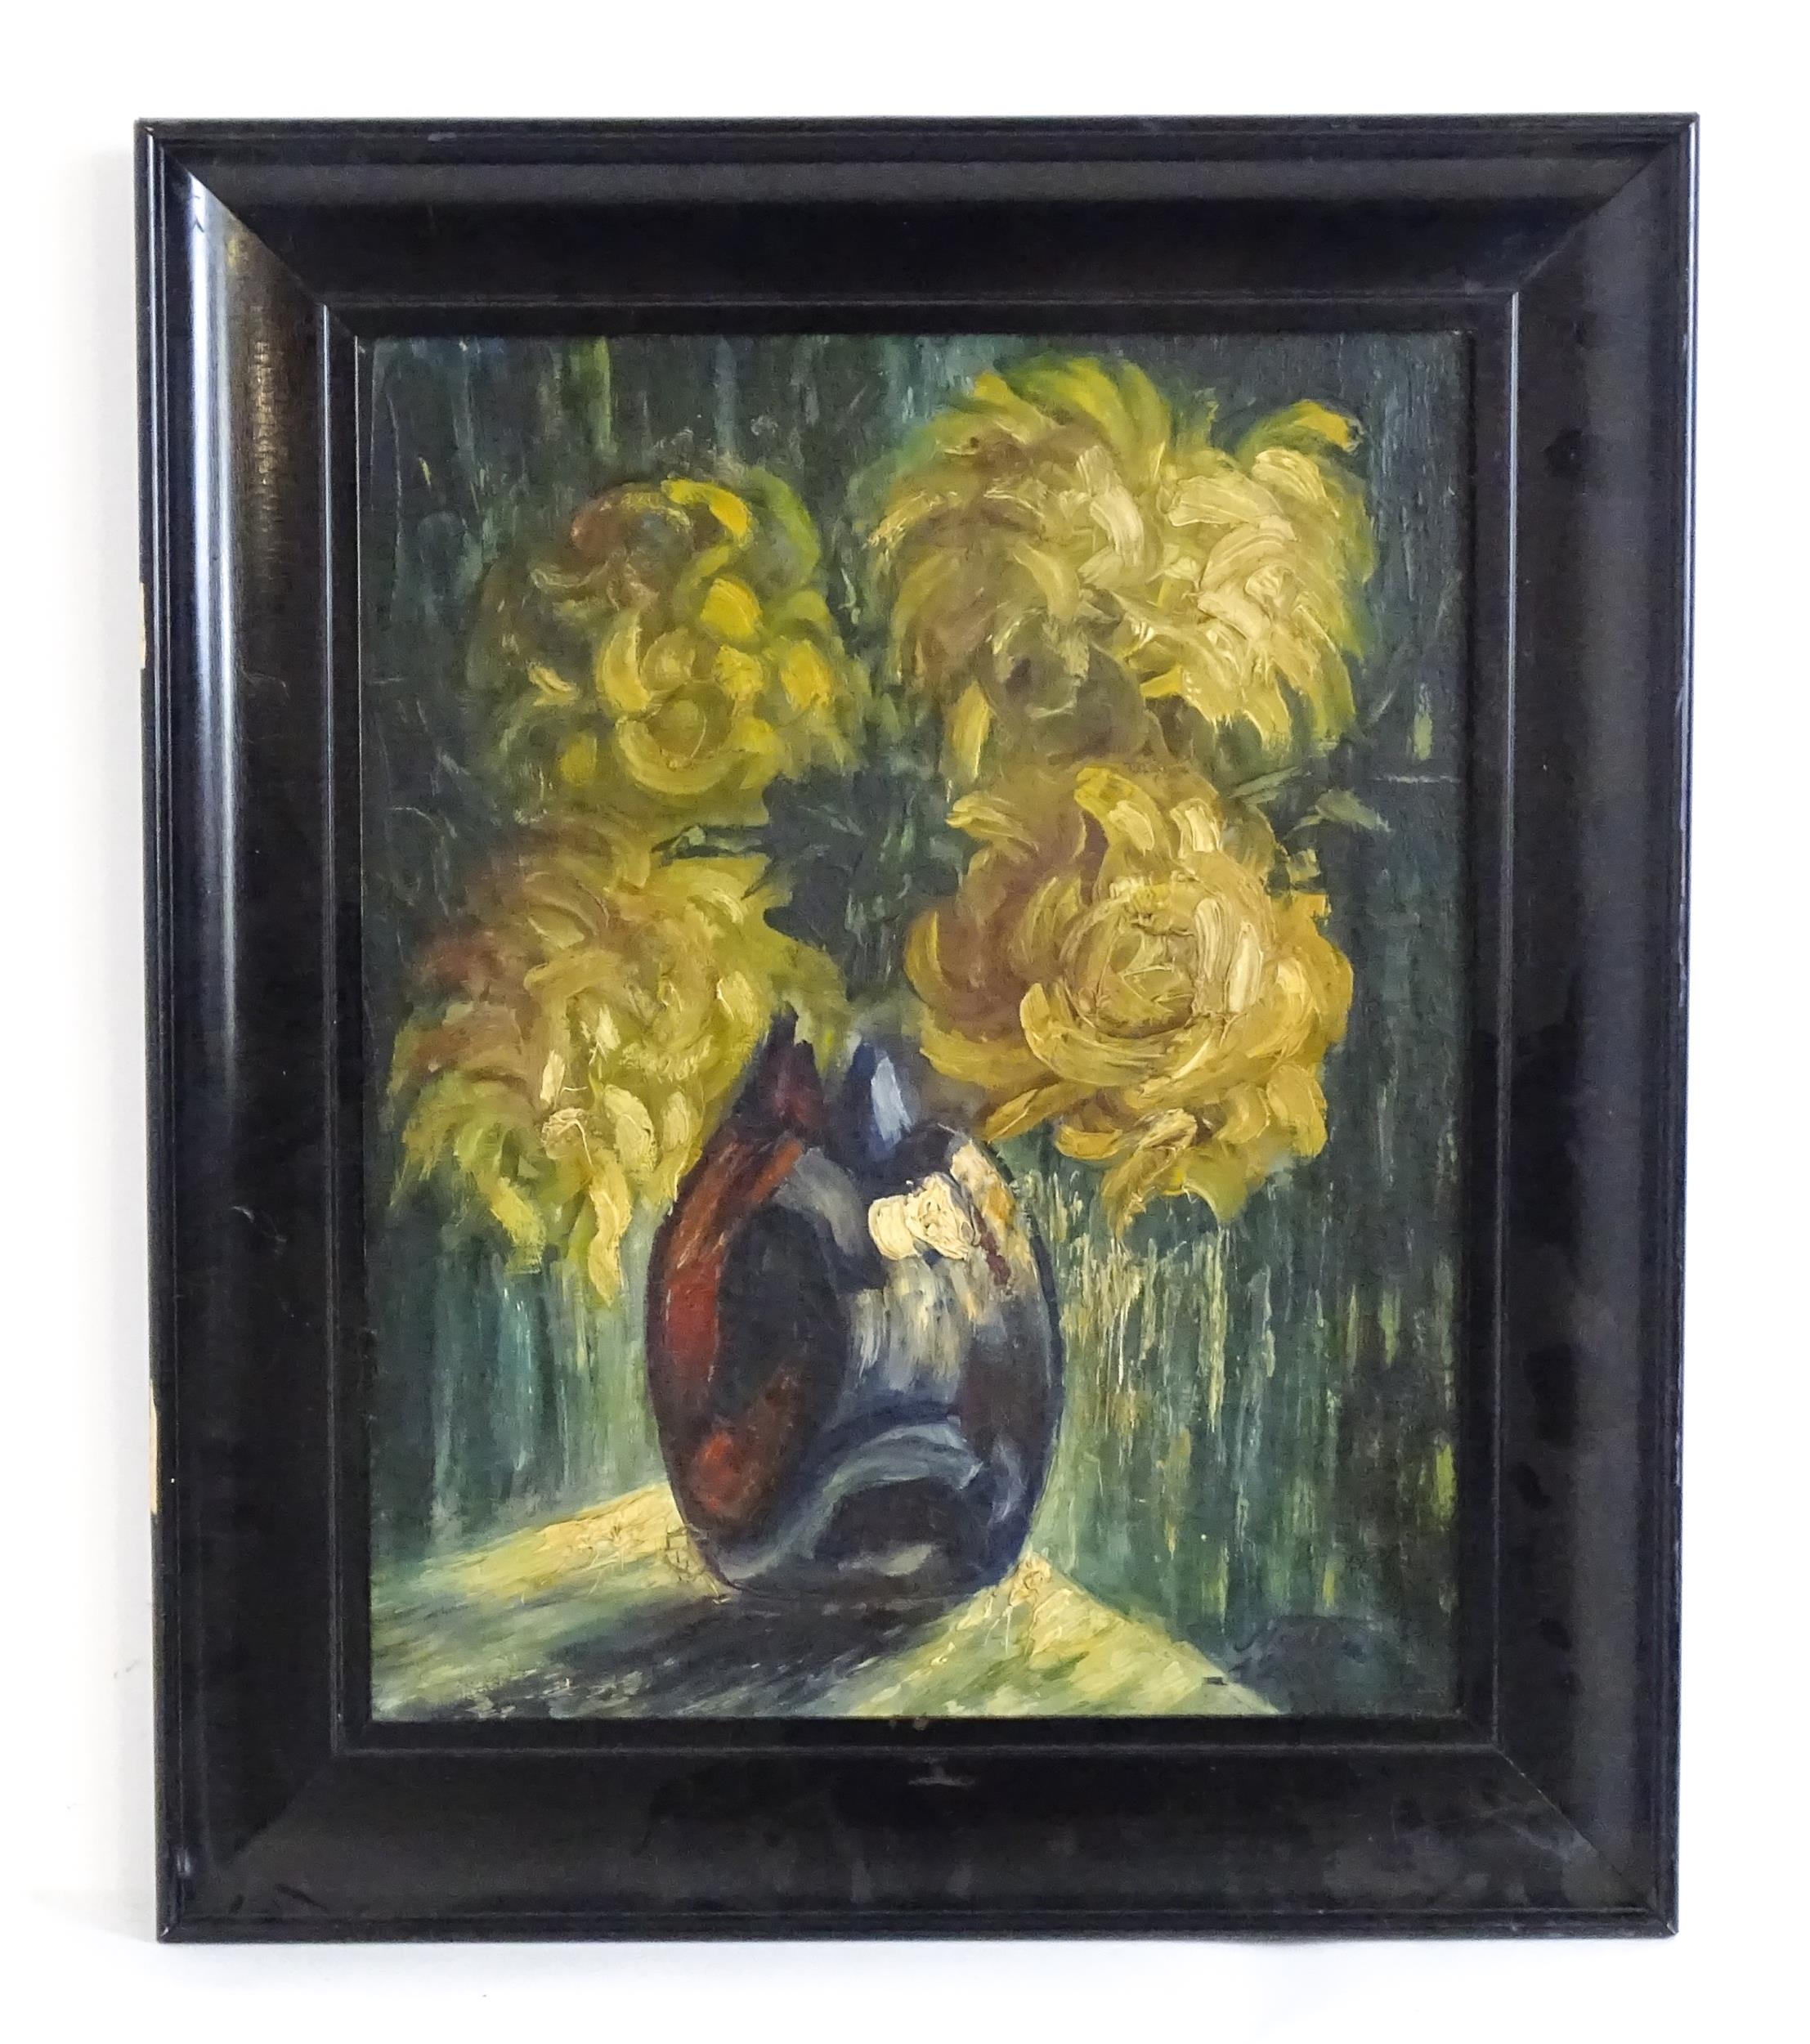 20th century, Oil on canvas, A still life with flowers in bloom. Signed Nesta and dated 1930 lower